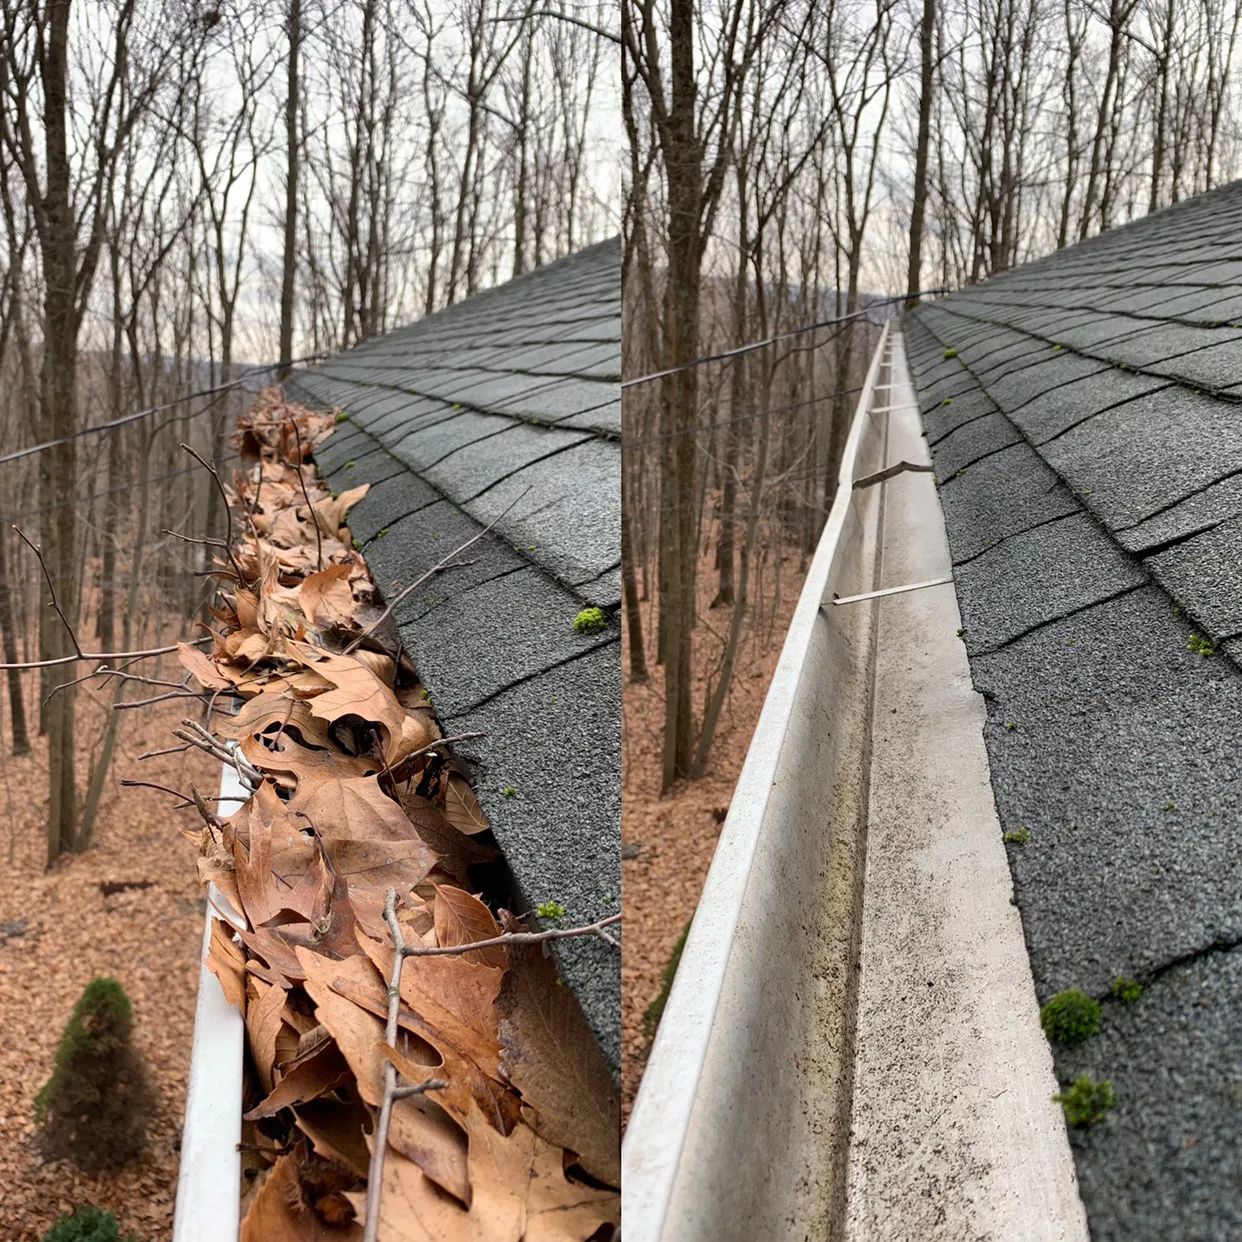 before and after photo of clean gutter vs gutter filled with leaves